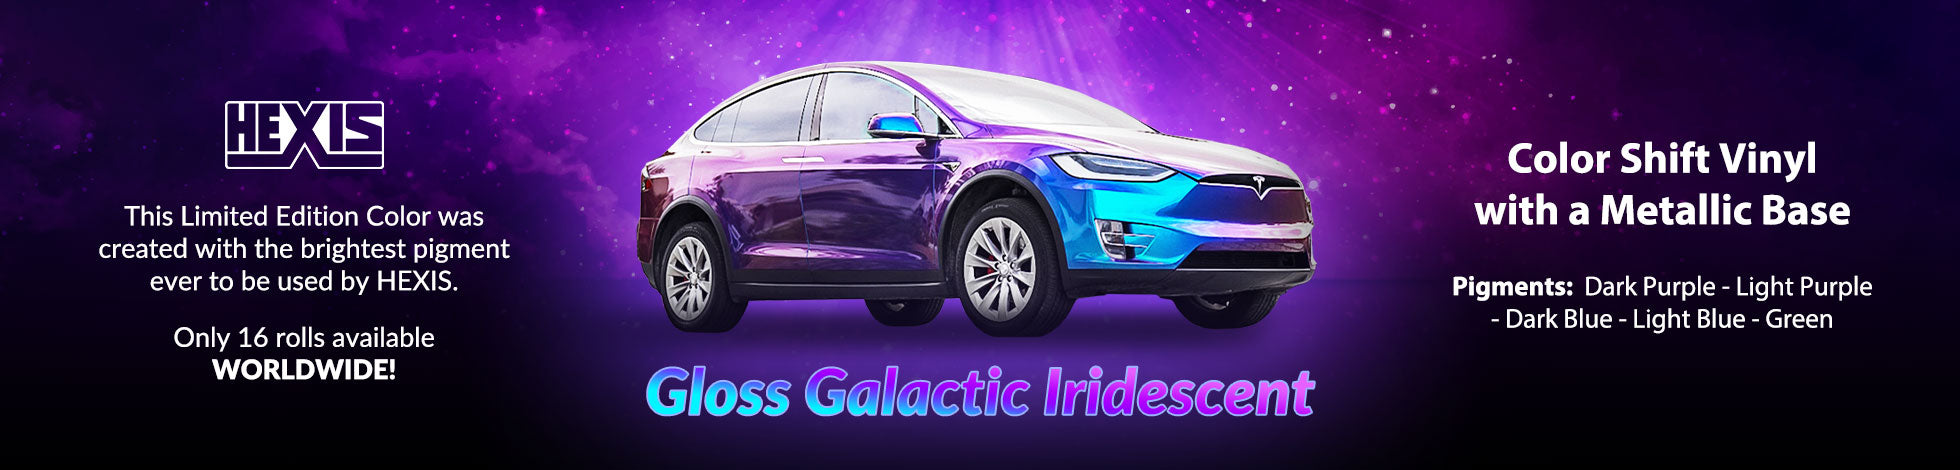 New Hexis Gloss Galactic Iridescent (Limited Edition)